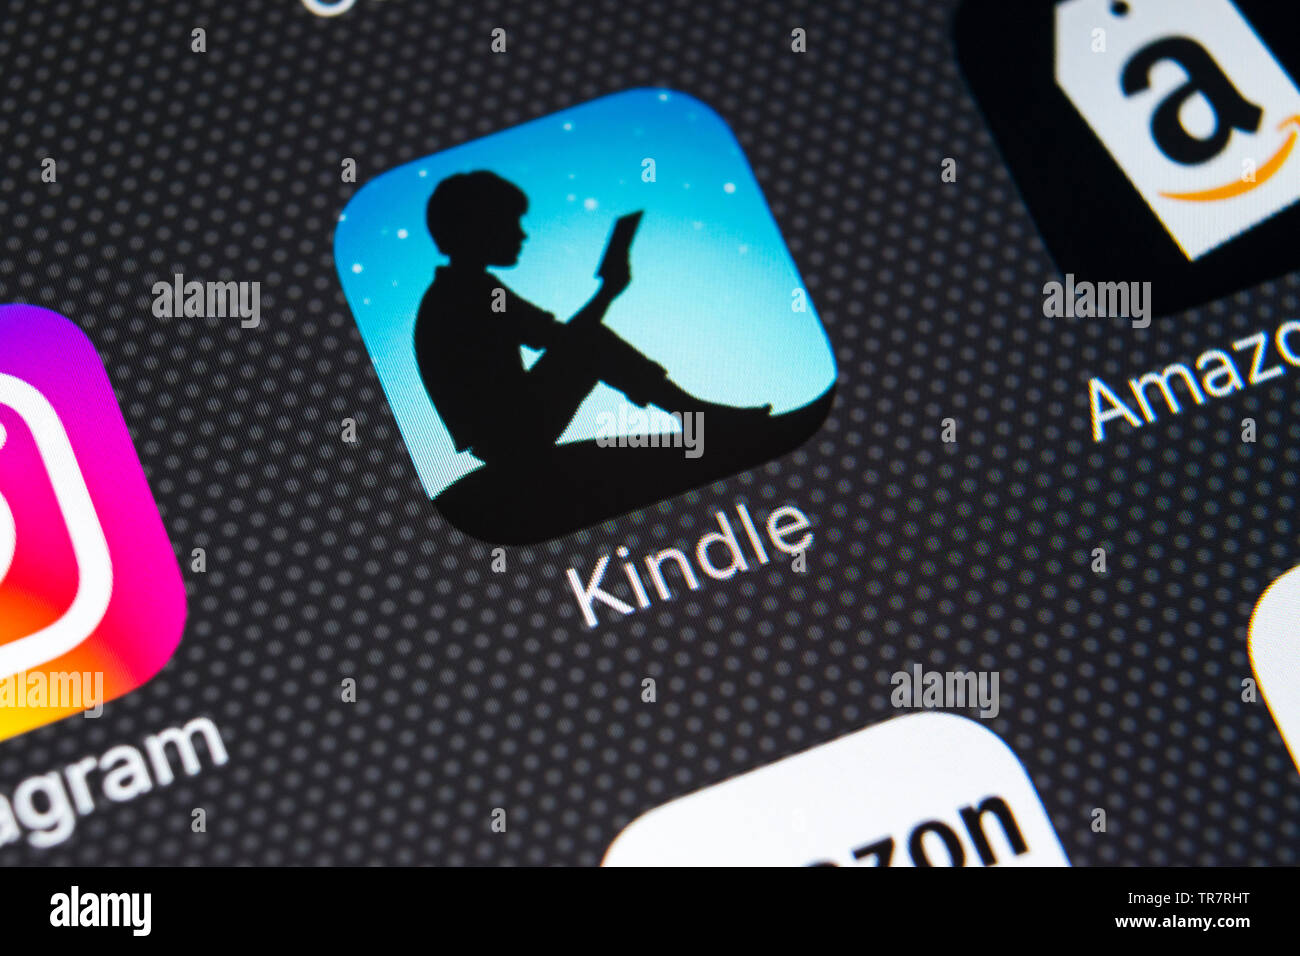 Sankt-Petersburg, Russia, February 21, 2018: Amazon Kindle application icon  on Apple iPhone X screen close-up. Amazon Kindle app icon. Amazon kindle a  Stock Photo - Alamy